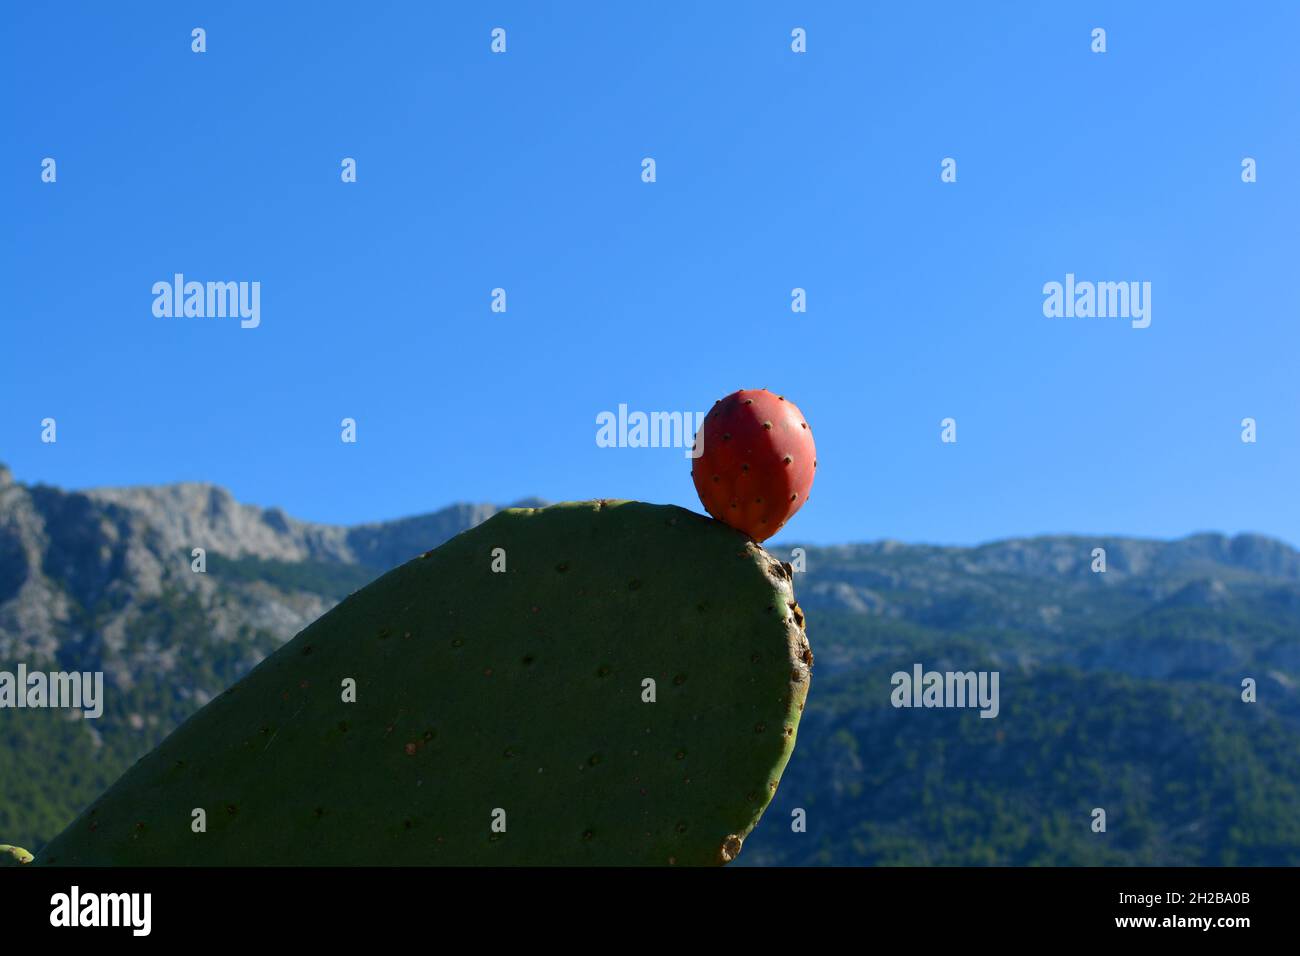 Prickly pear cactus in front of mountain scenery near Soller, Mallorca, Spain Stock Photo